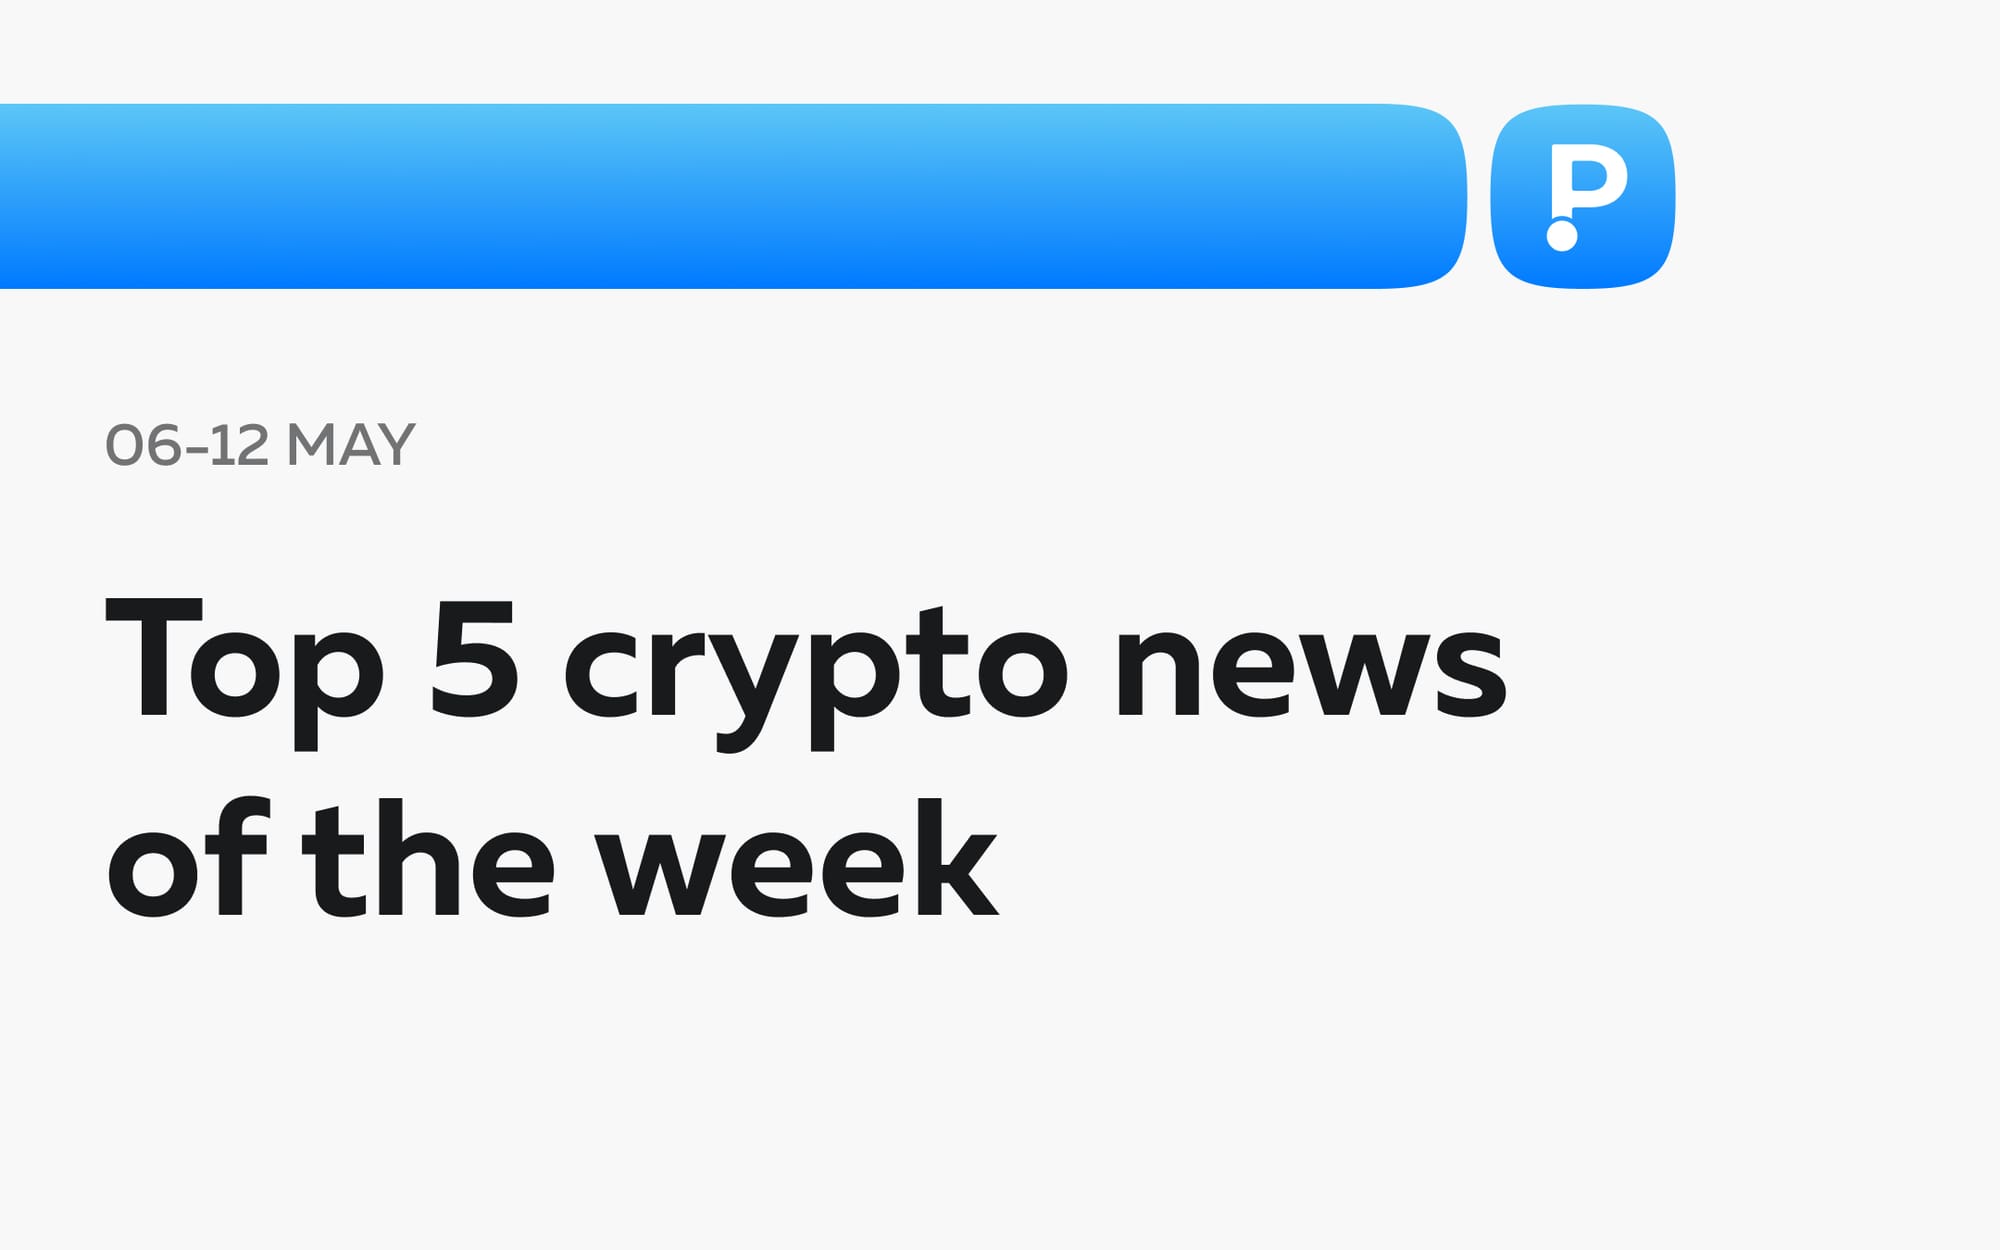 Top 5 Crypto News of the Week! (06 - 12 May)